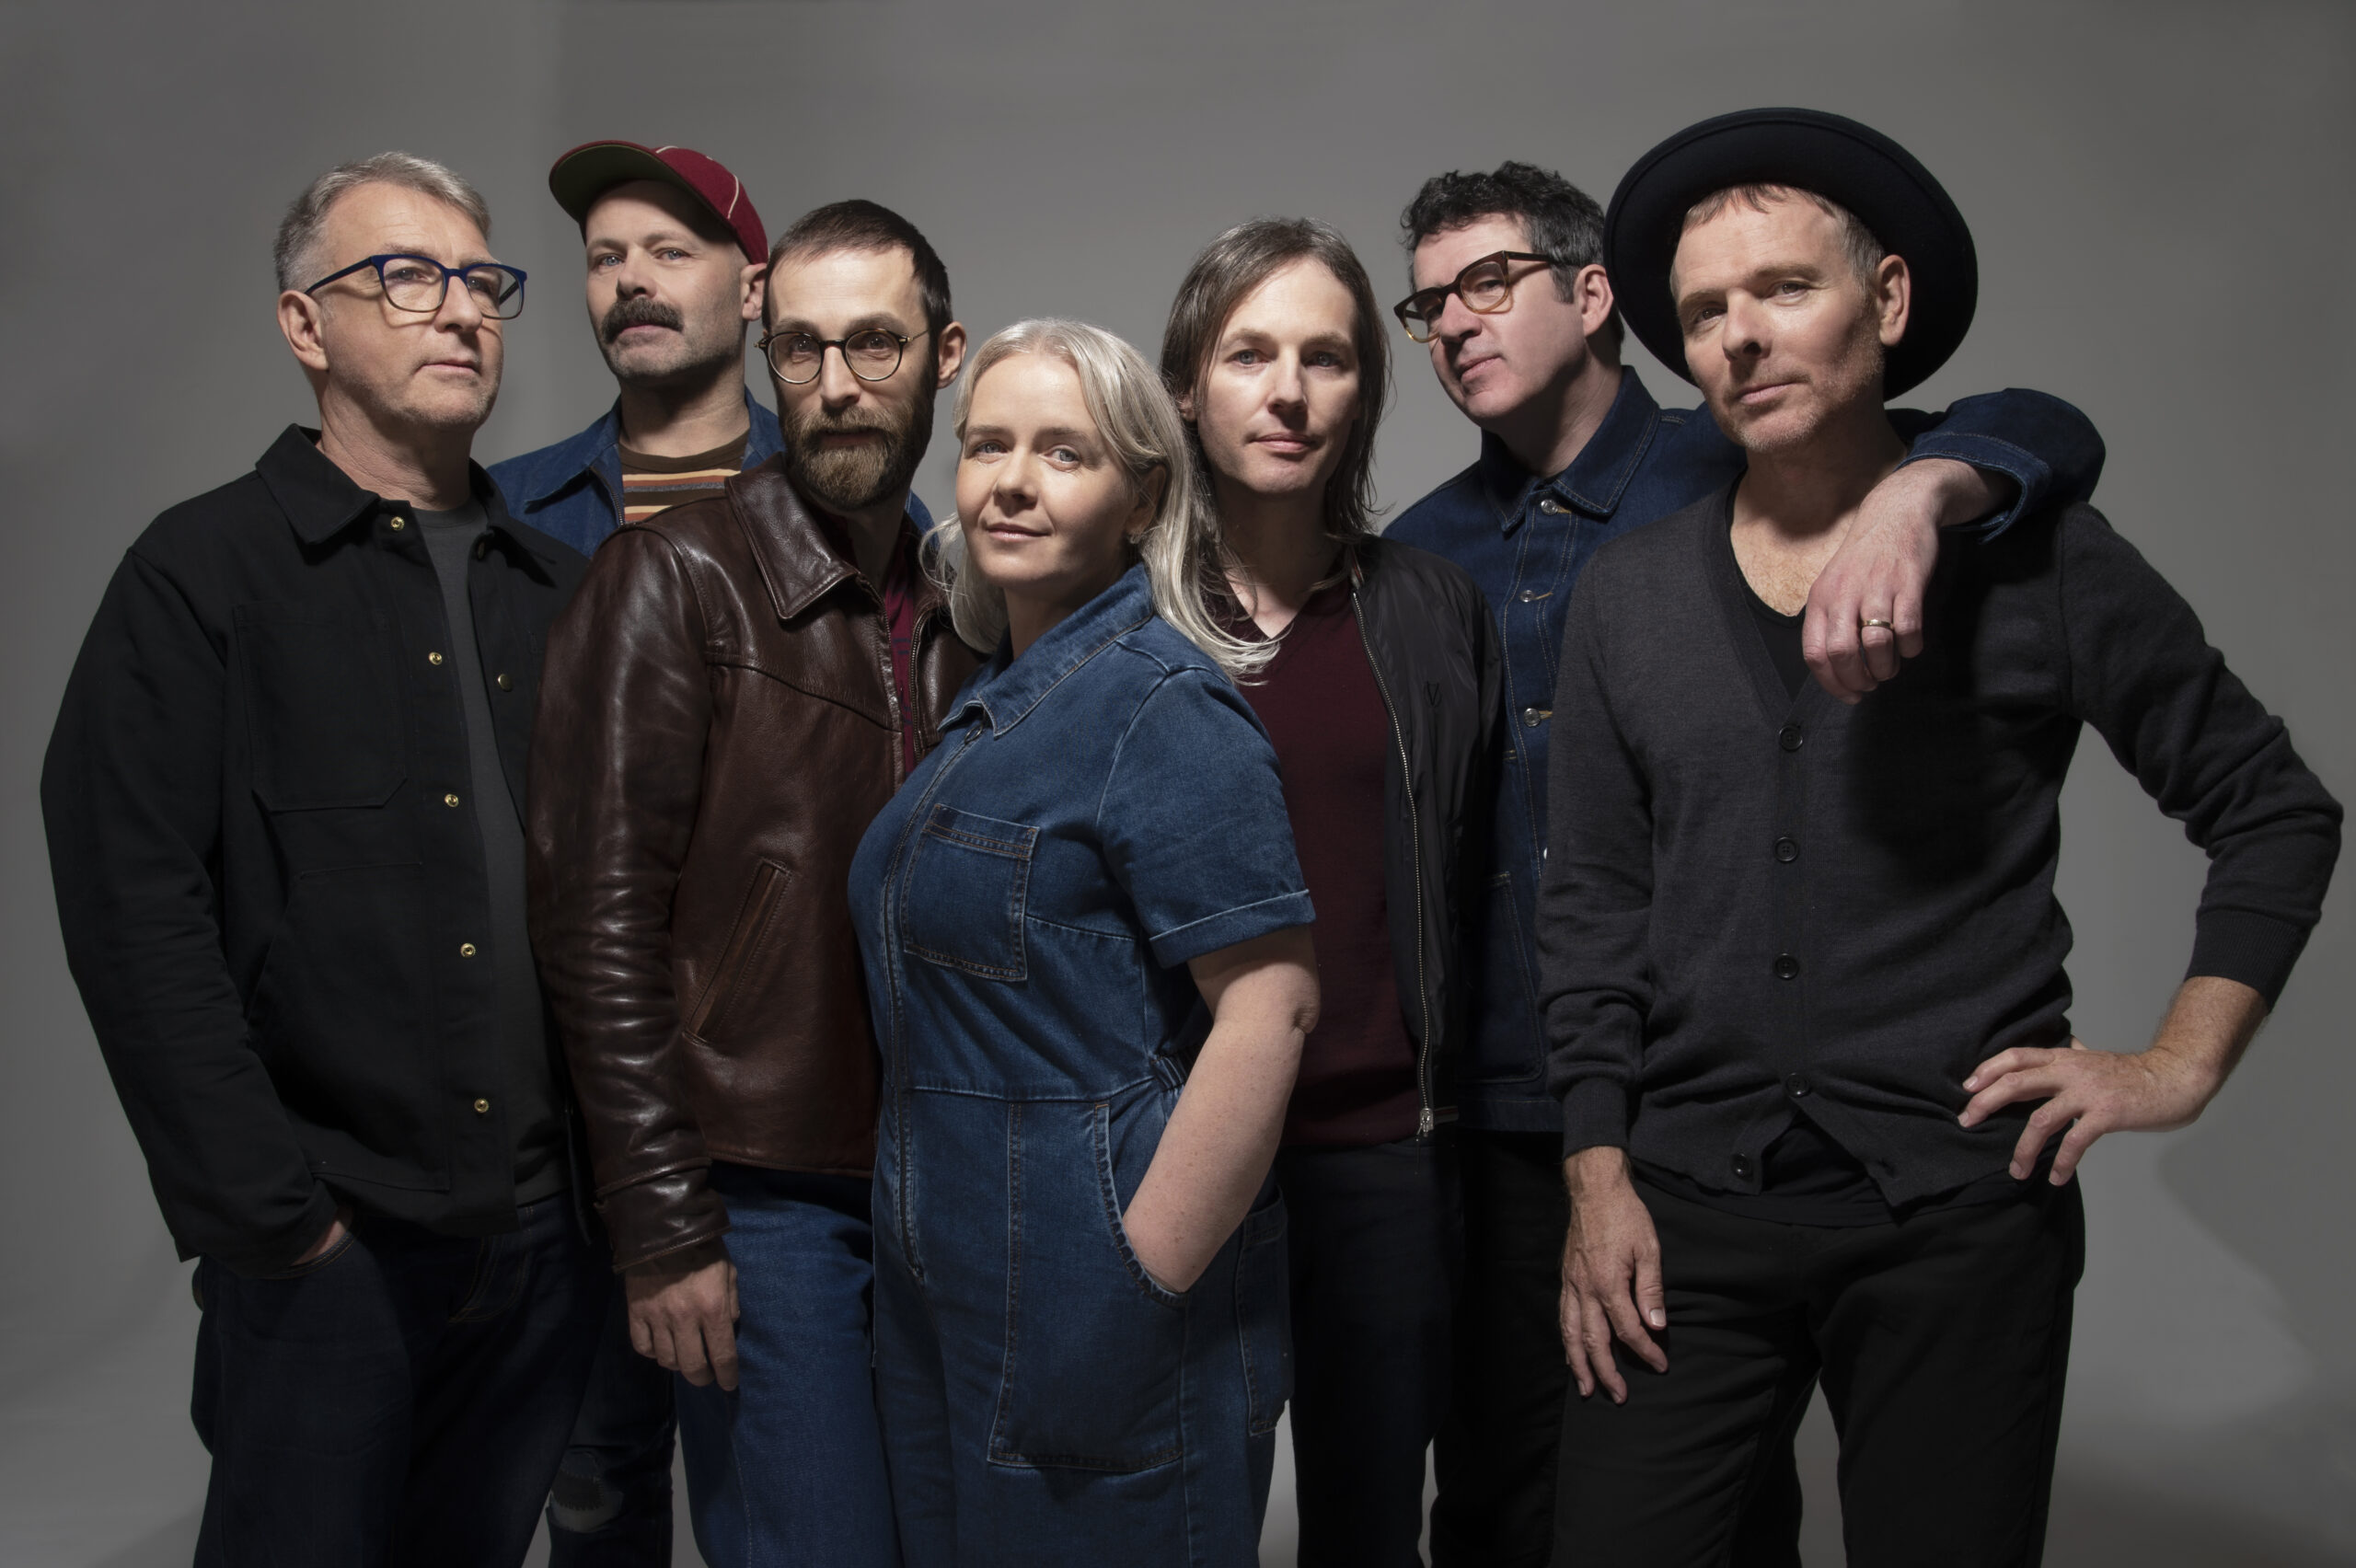 Belle and Sebastian Release 'If They're Shooting At You' in Support of Ukraine War Victims